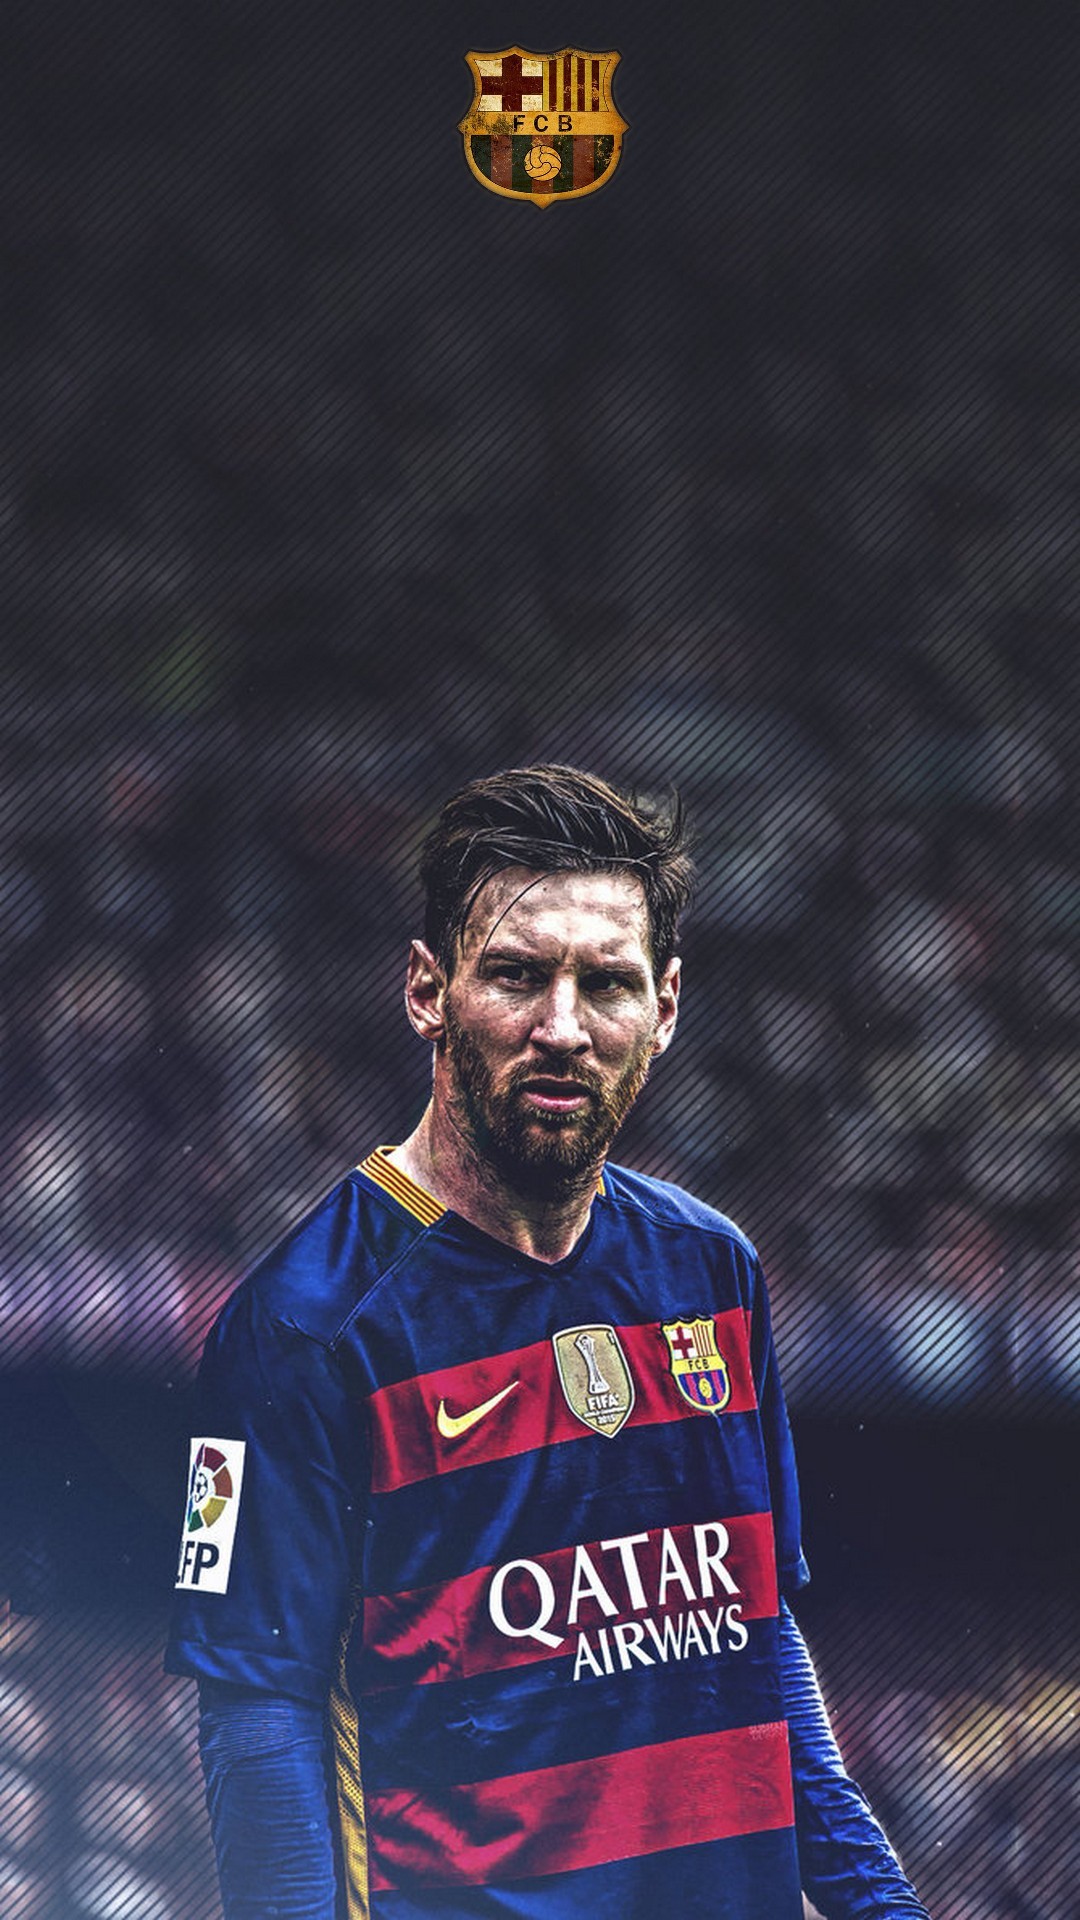 Wallpaper Leo Messi iPhone With Resolution 1080X1920 pixel. You can make this wallpaper for your Mac or Windows Desktop Background, iPhone, Android or Tablet and another Smartphone device for free